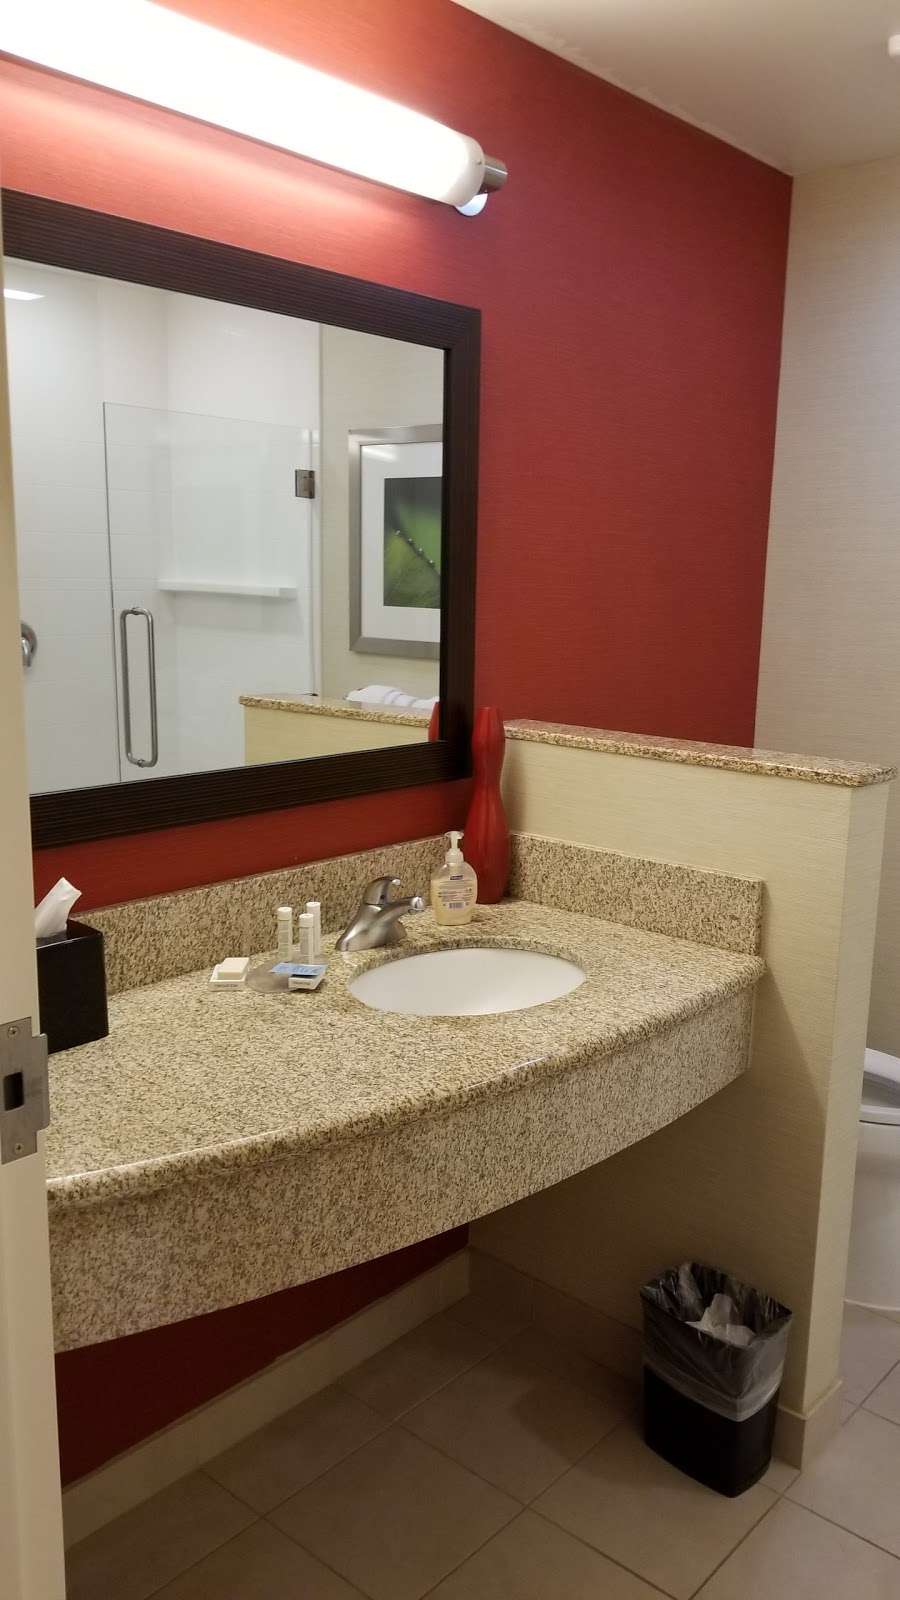 Courtyard by Marriott Kansas City at Briarcliff | 4000 N Mulberry Dr, Kansas City, MO 64116 | Phone: (816) 841-3300